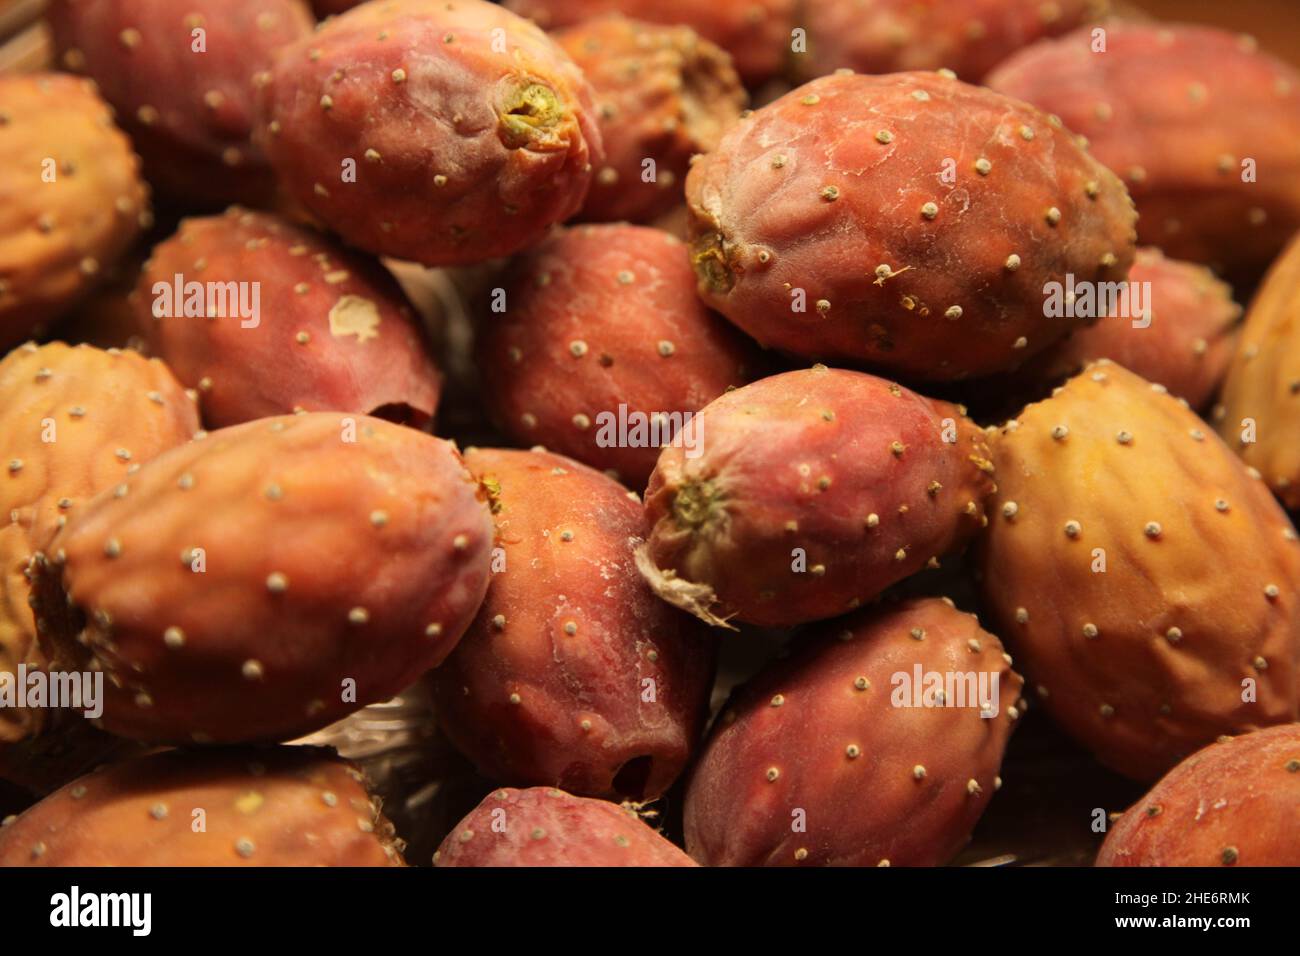 Prickly pear. Ripe cactus fruits. Stock Photo